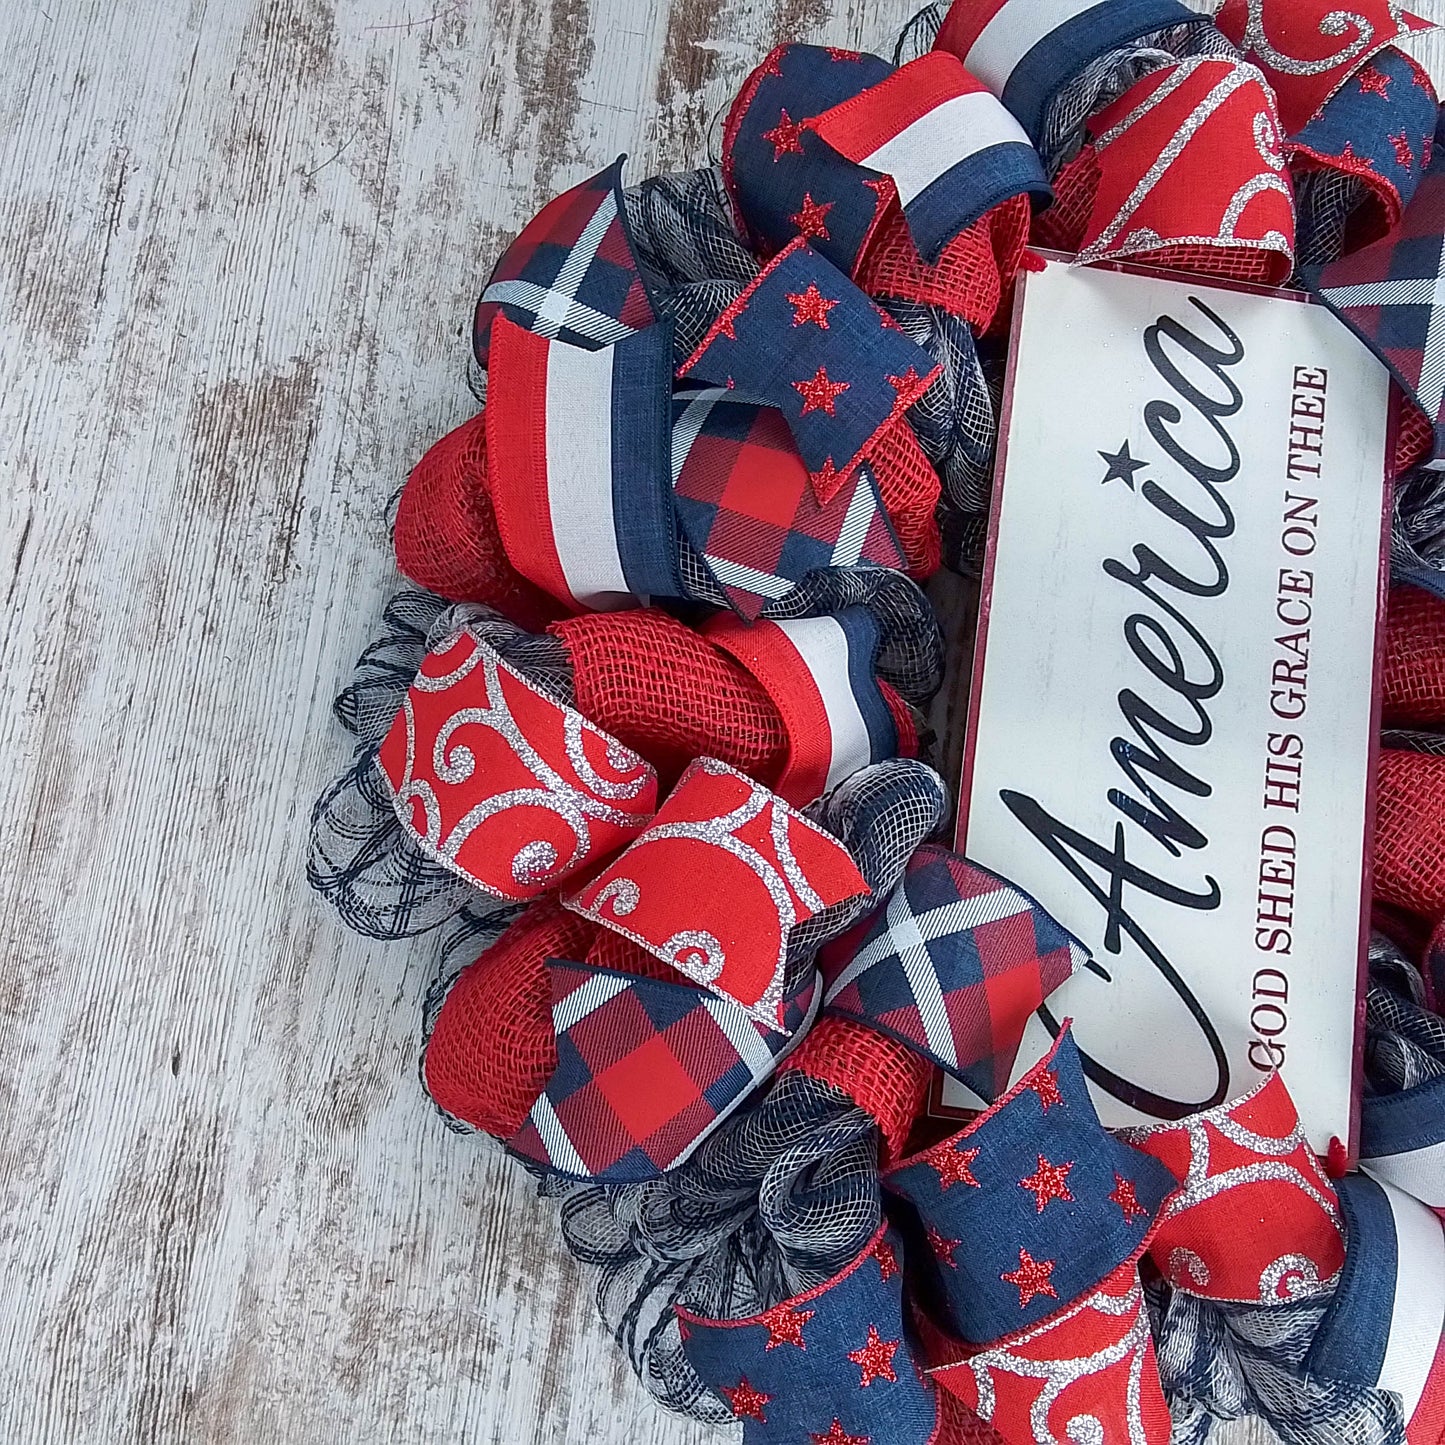 God Bless America Fourth of July Door Wreath